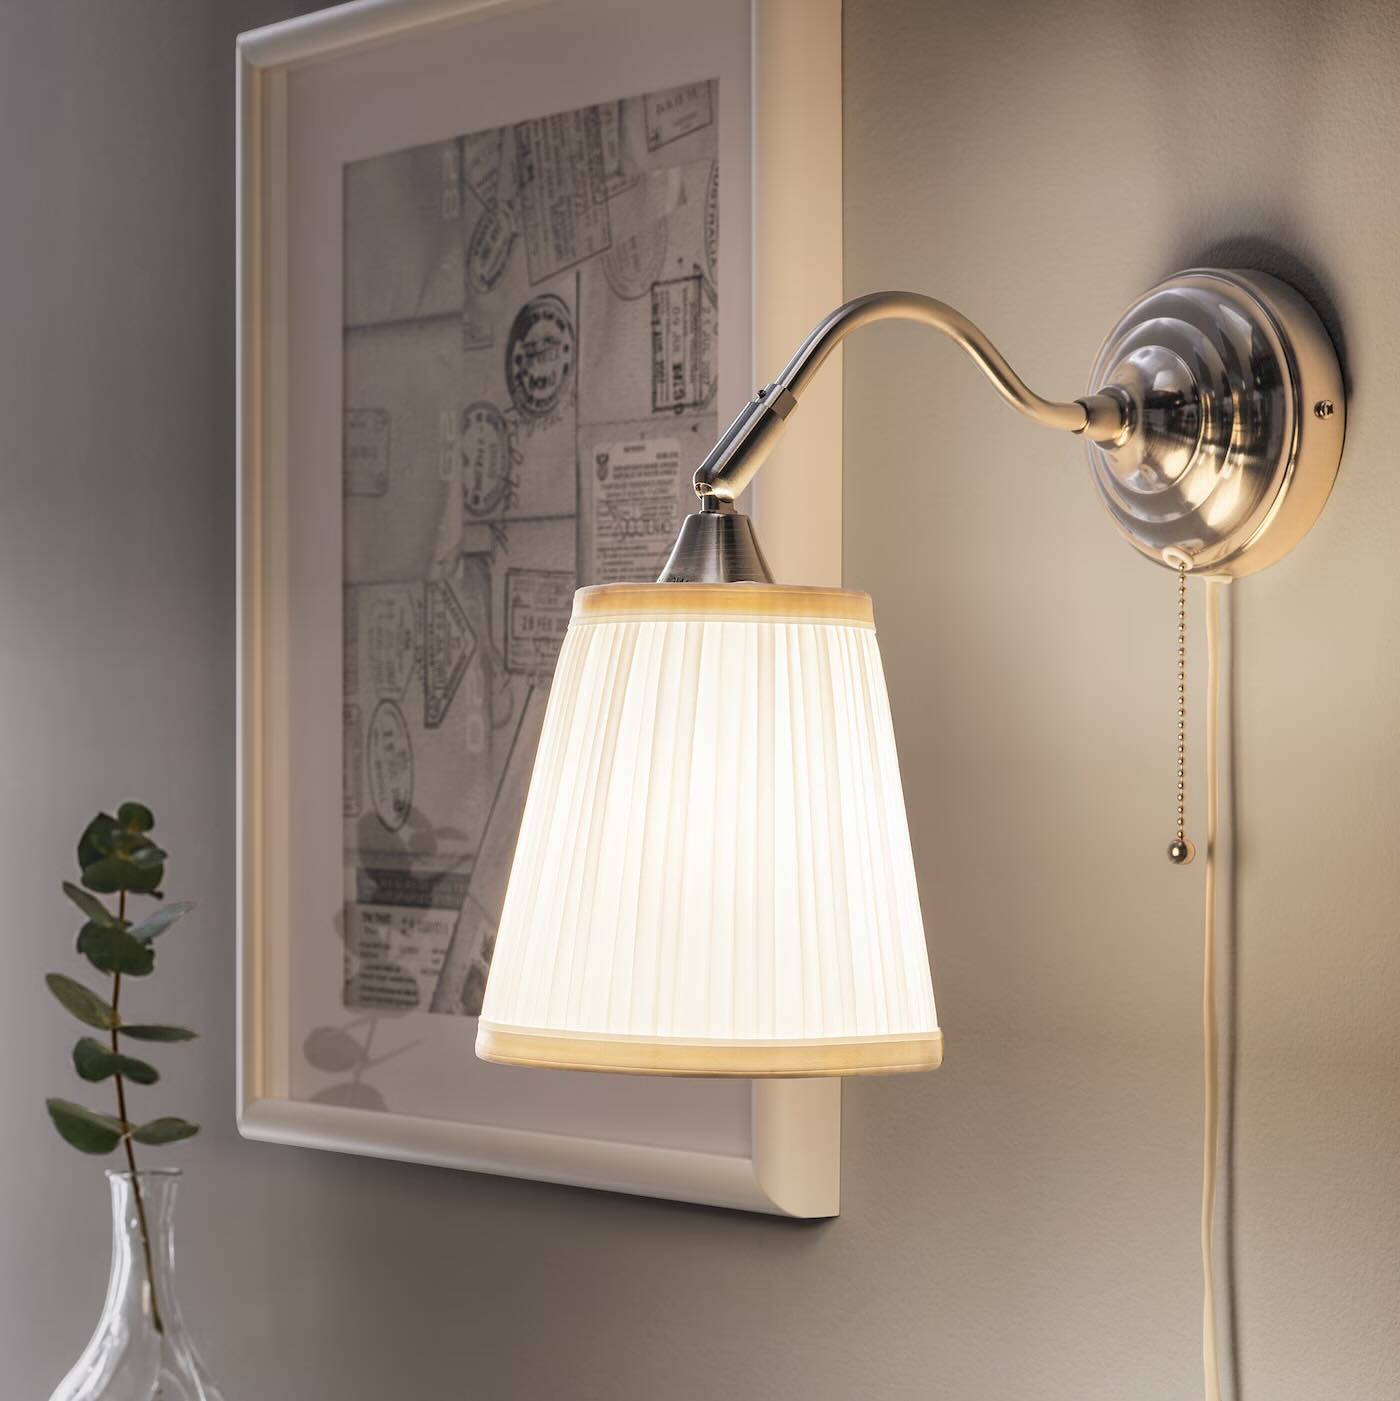 How To Install A Wall Lamp